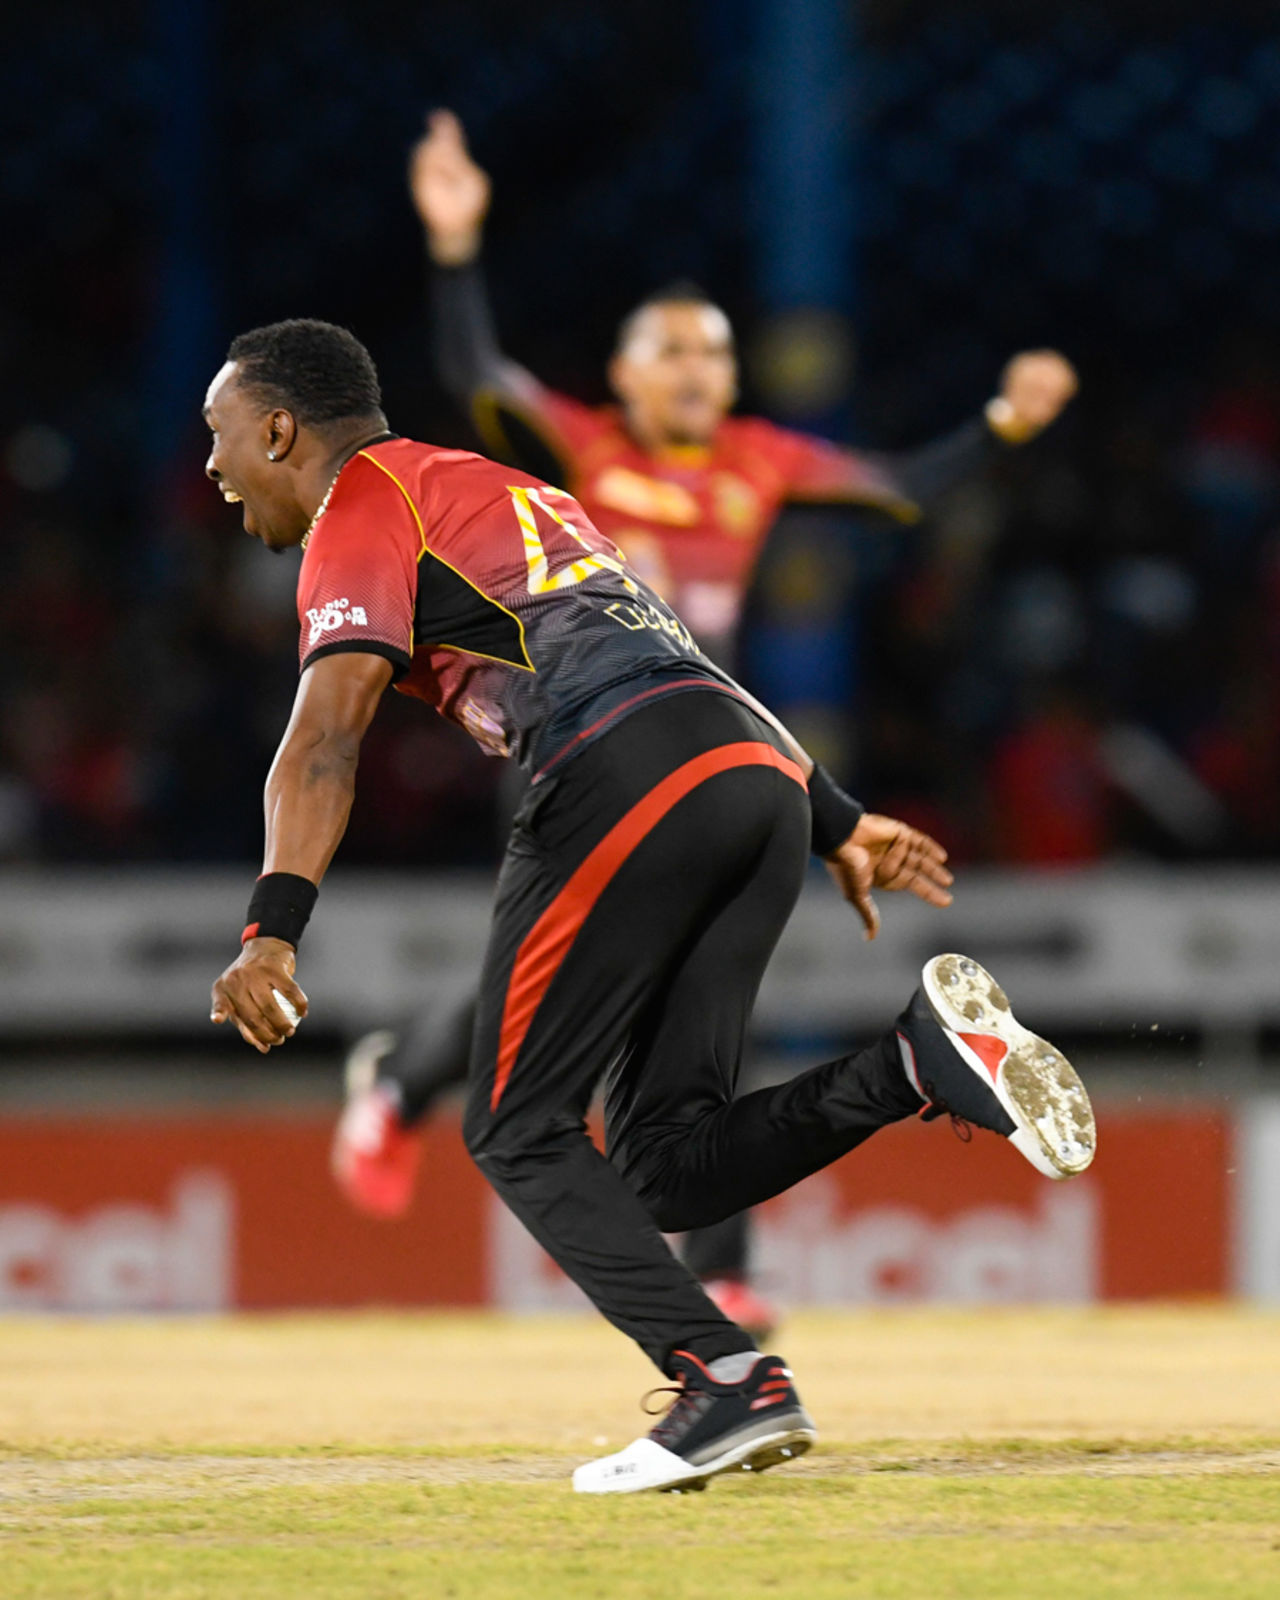 Dwayne Bravo wheels away in celebration after taking a catch, Trinbago Knight Riders v St Kitts and Nevis Patriots, CPL 2017, Port of Spain, August 14, 2017